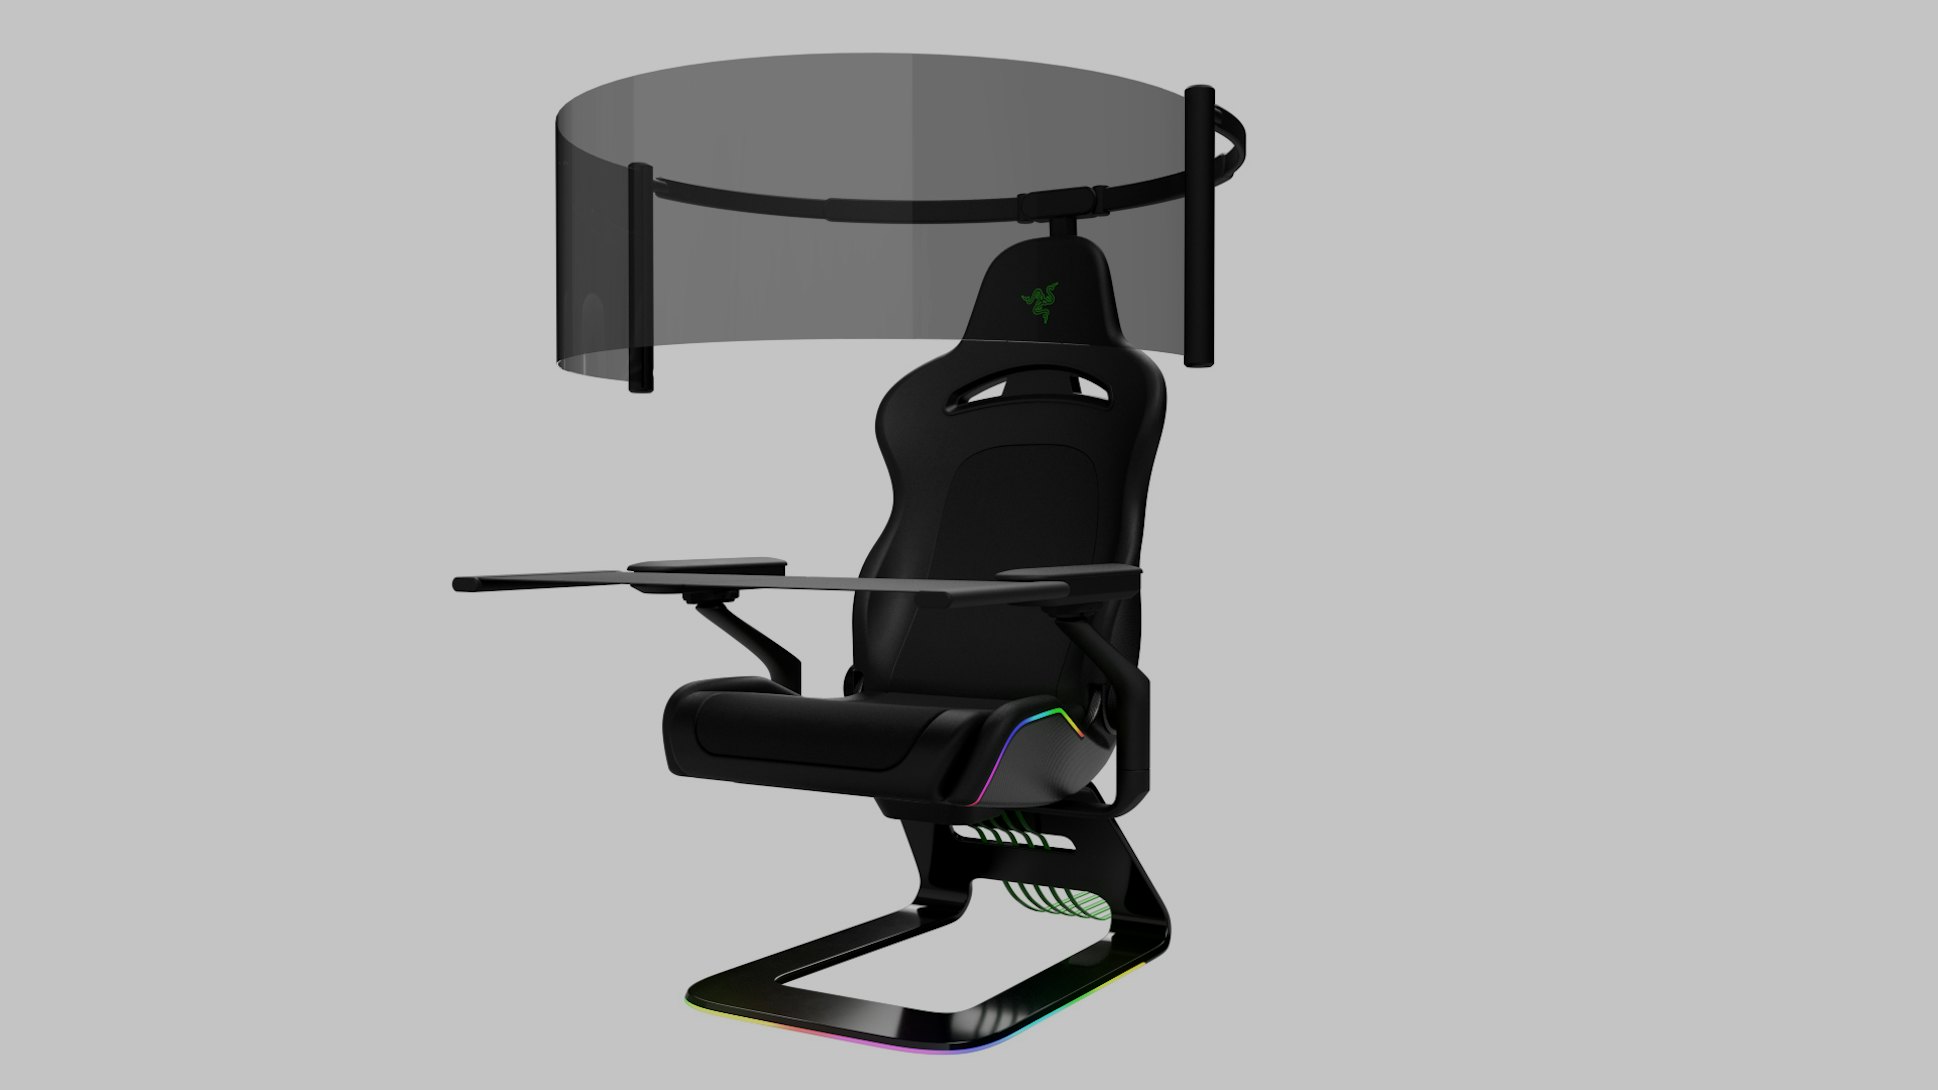 Project Brooklyn  Concept Gaming Chair For Next Generation Immersion on  Make a GIF